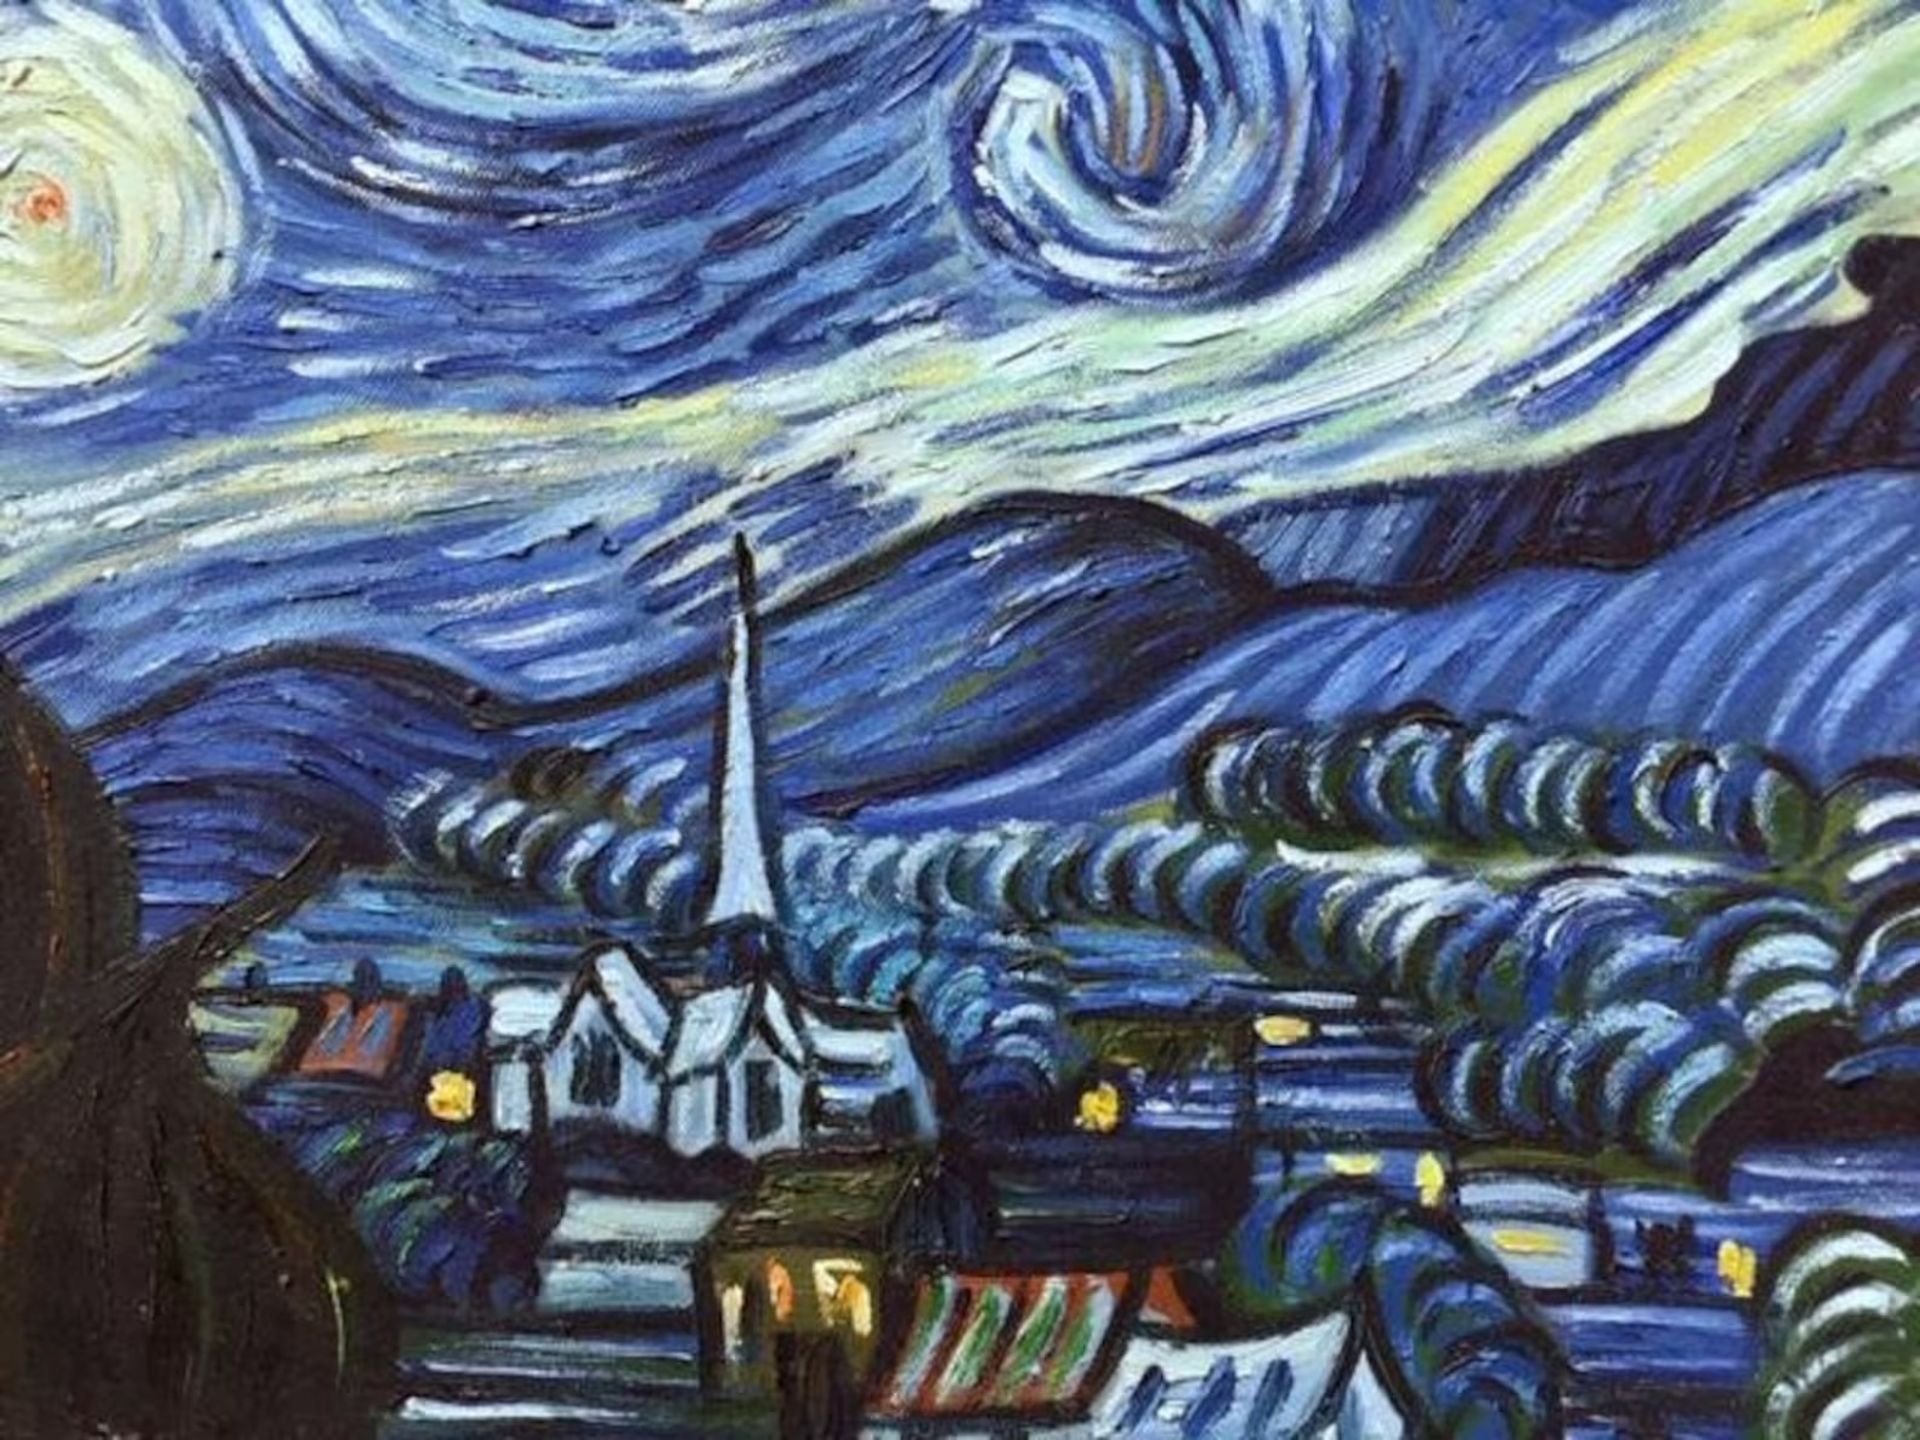 After Vincent Van Gogh "Starry Night" Oil Painting - Image 2 of 4